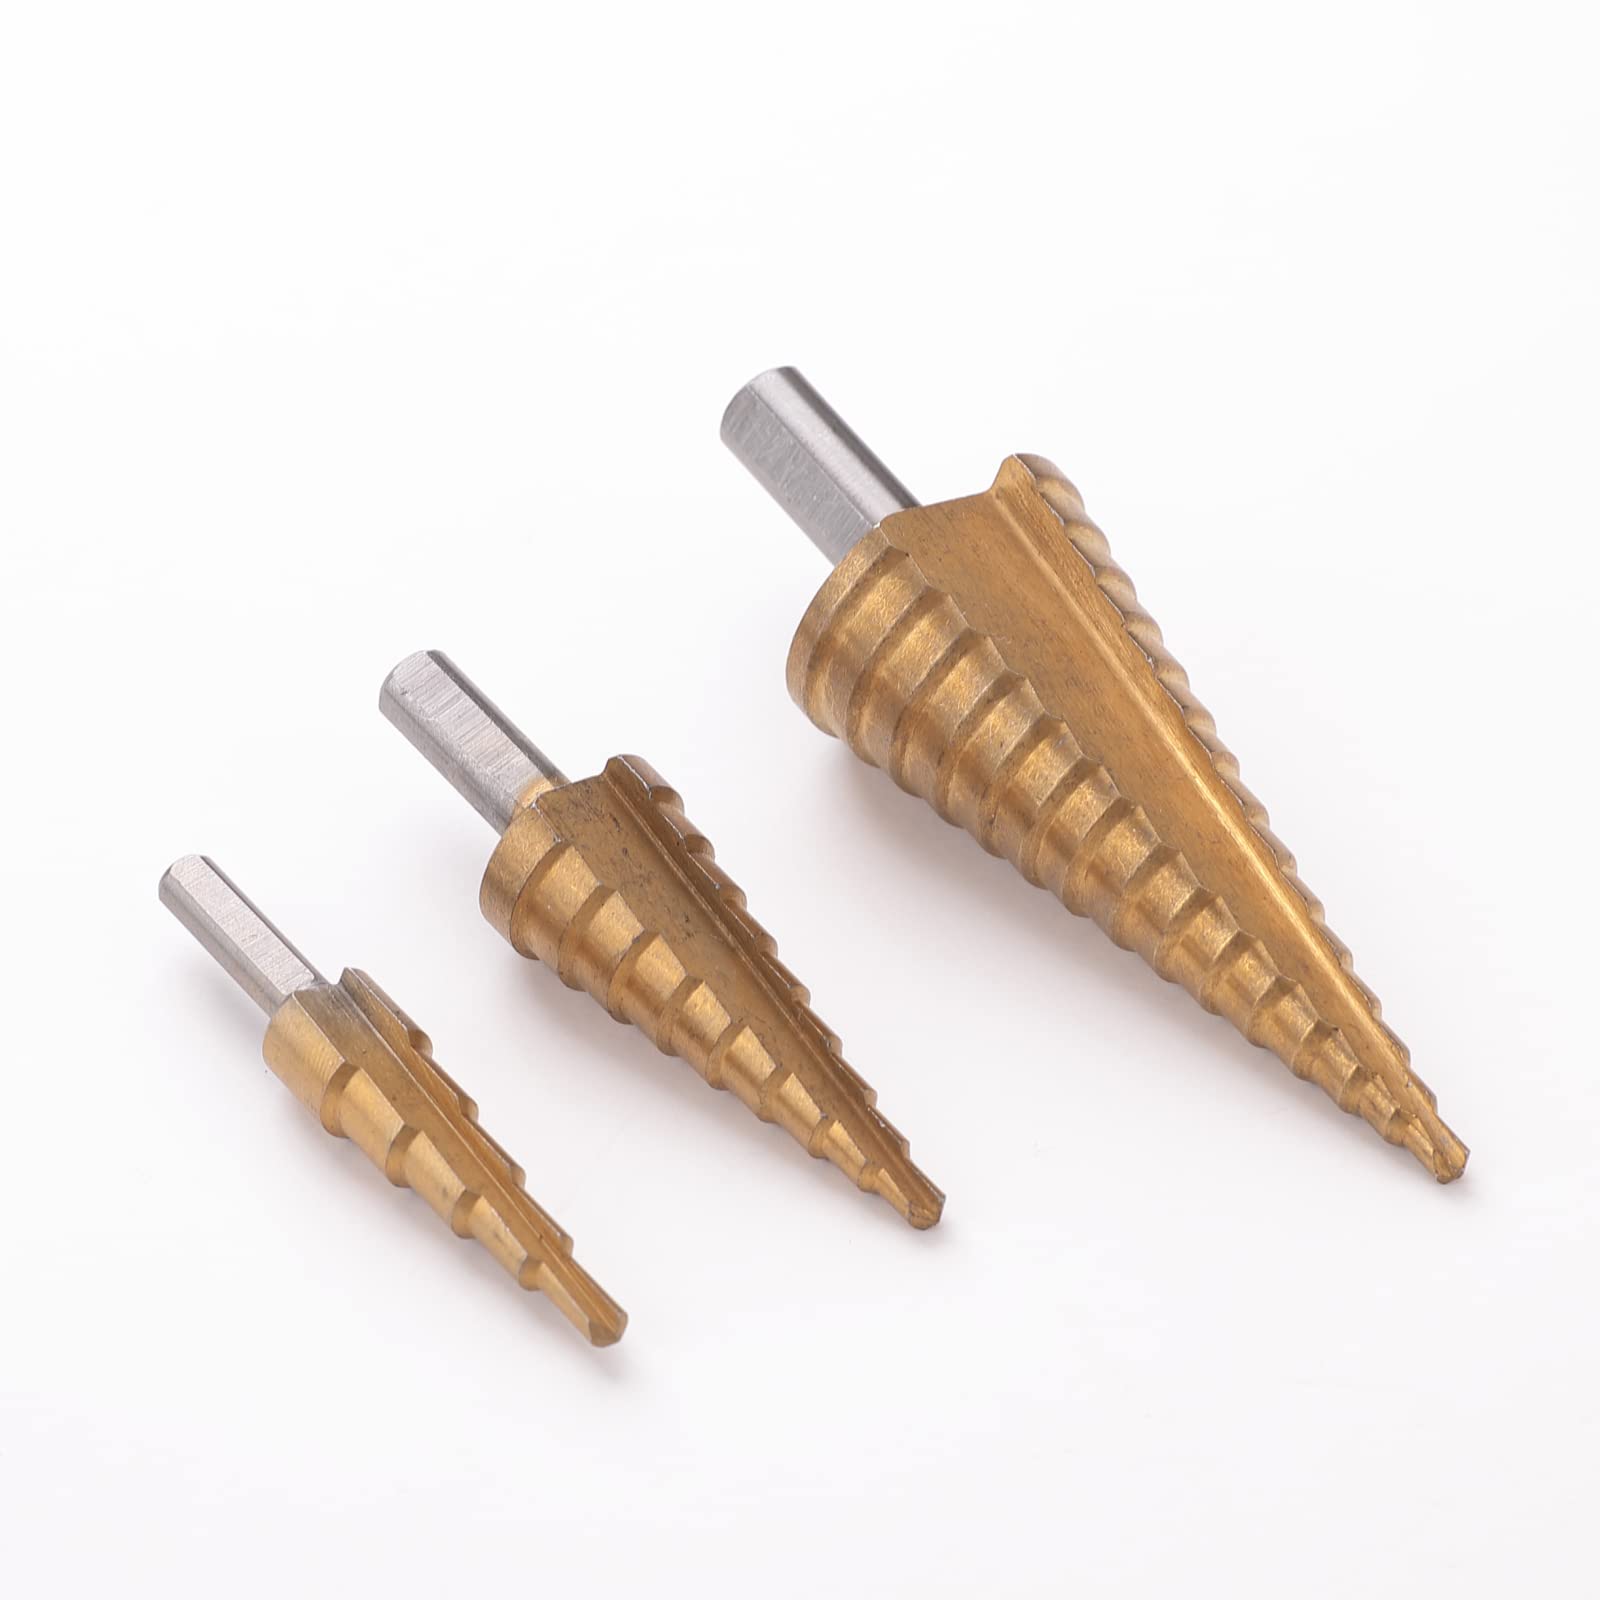 Cheston Titanium Coated Large Step Cone Hole Cutter Set - 3X HSS Drill Bit Steel - 4-12/20/32mm - Perfect for Concrete, Stainless Steel, and Hex Drilling